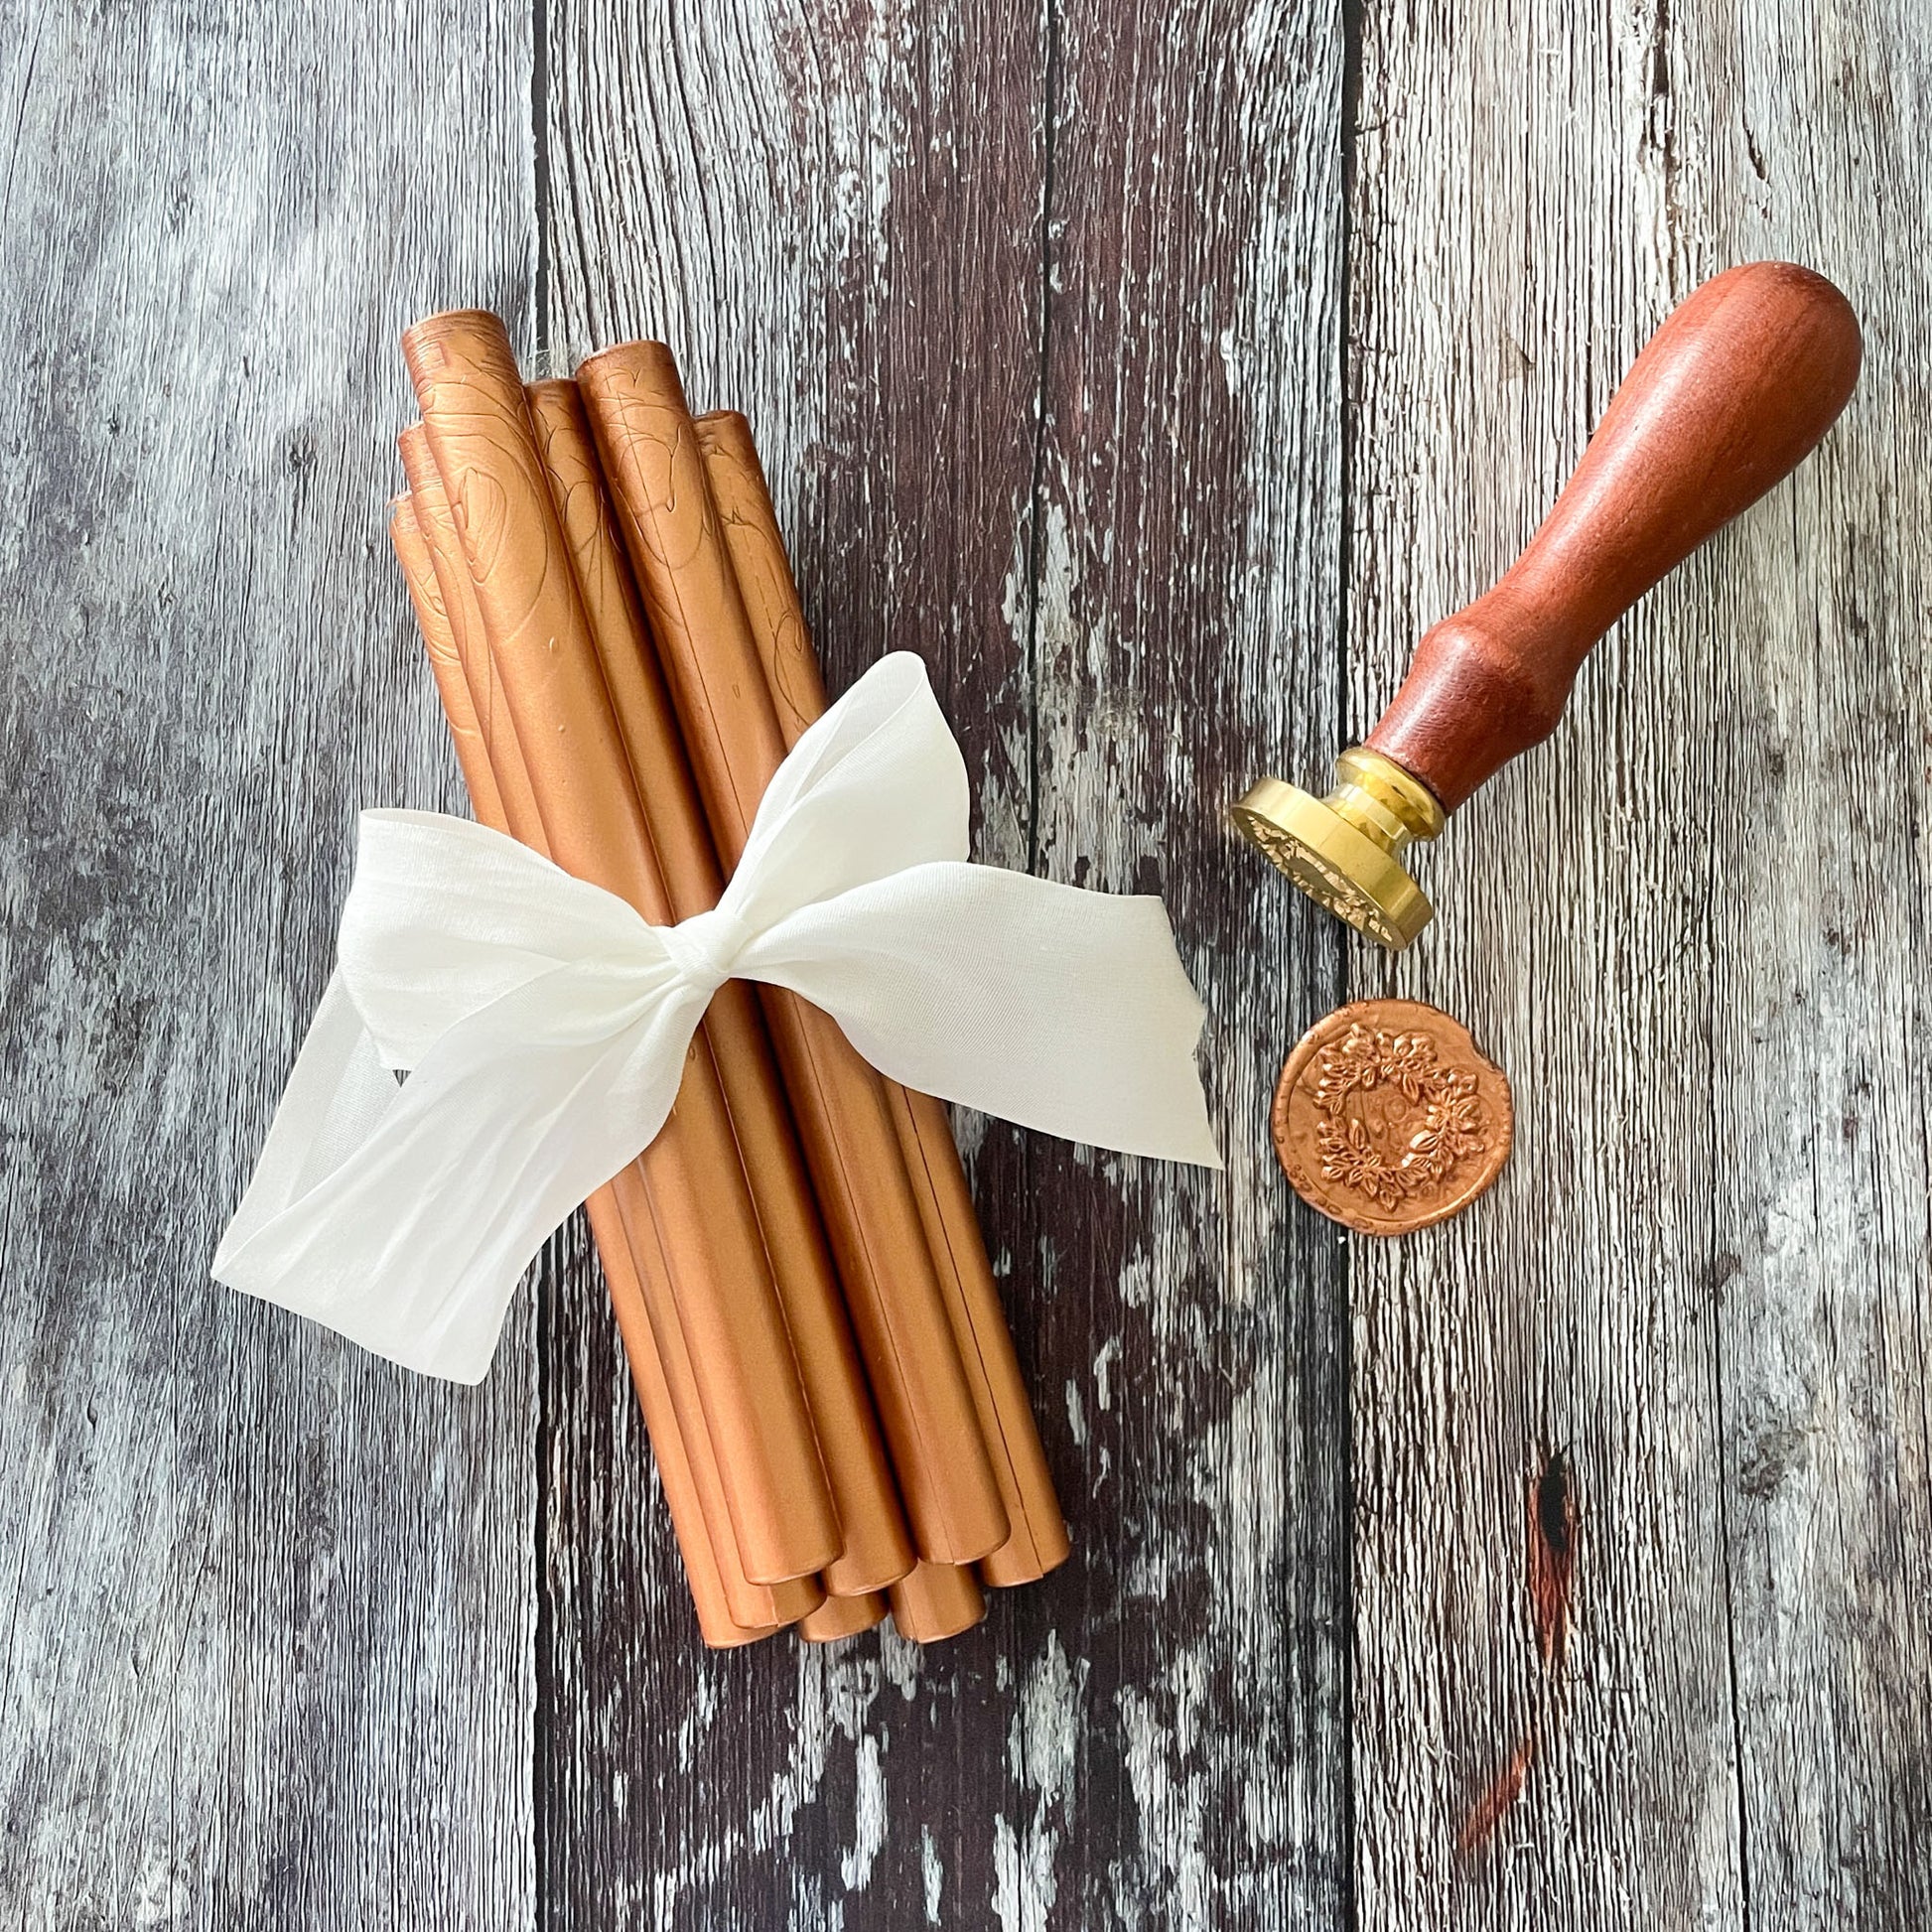 Metallic copper sealing wax sticks to make wax seals.  Eco friendly wax that can be used in a glue gun or with a melting spoon.  Add metallic wax seals to invitations, envelopes, packaging and more.  By The Natural Paper Company